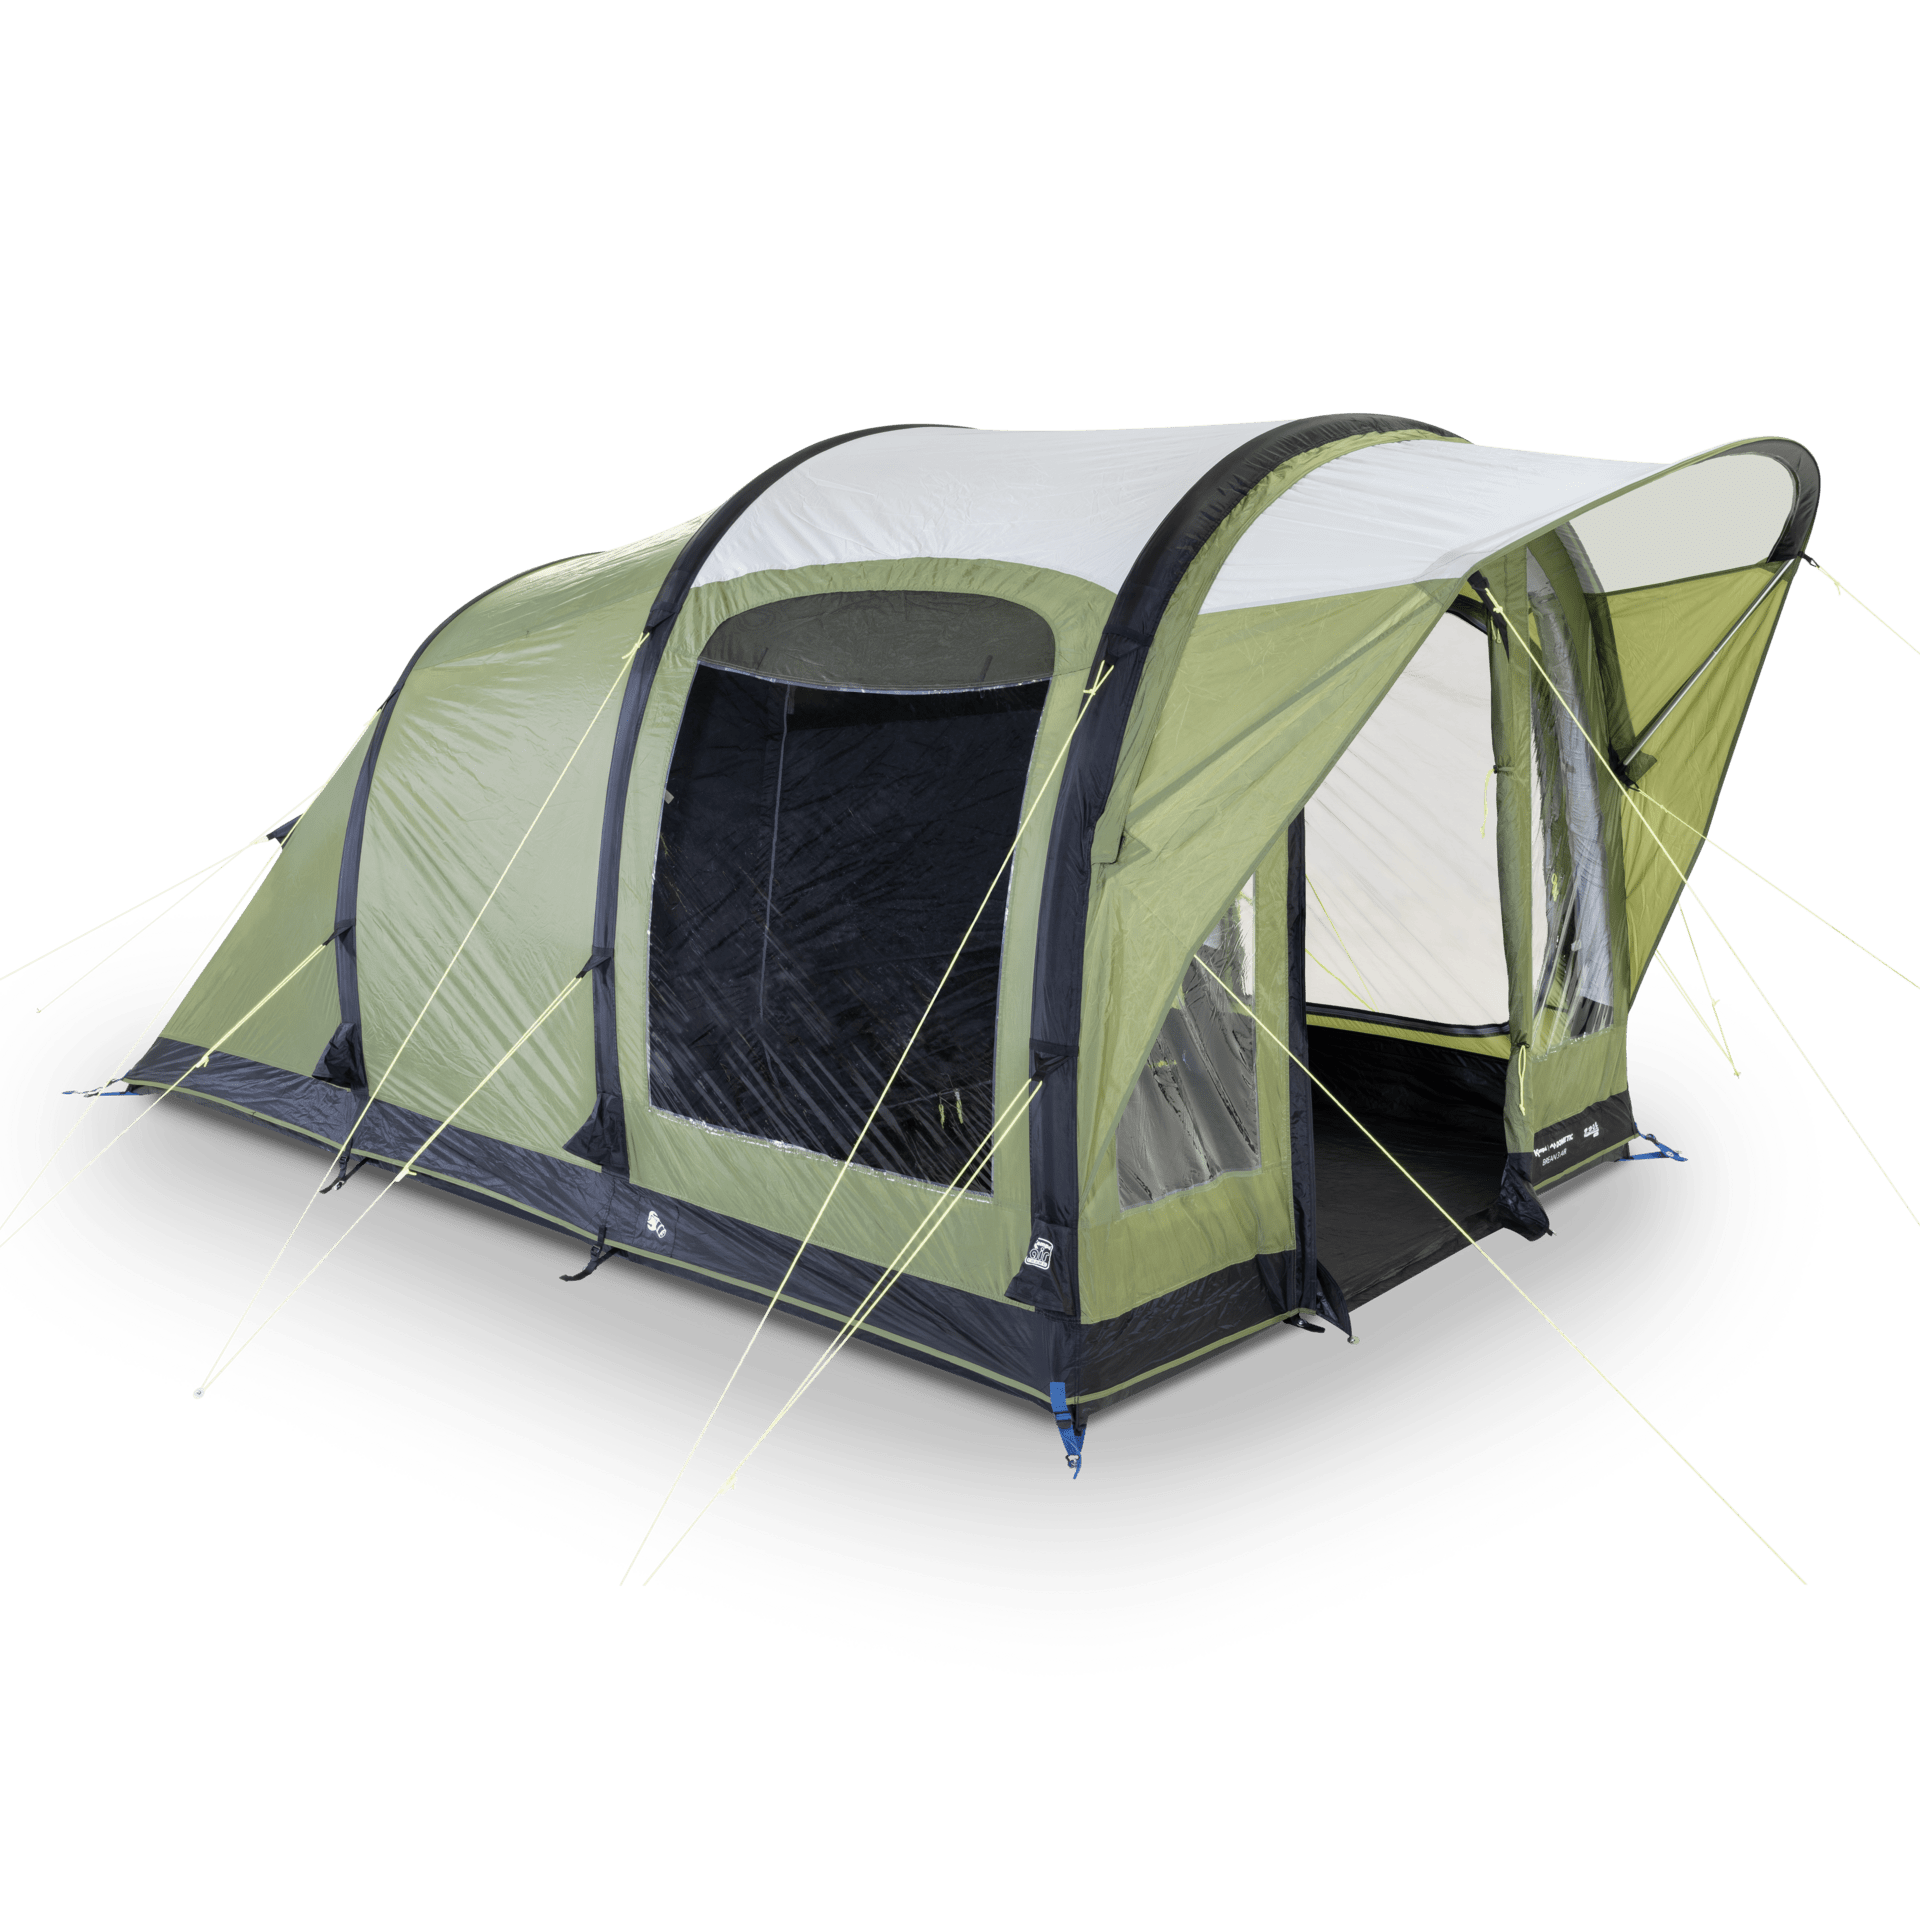 Kampa Dometic Wittering 6 AIR - Tente gonflable 6 personnes